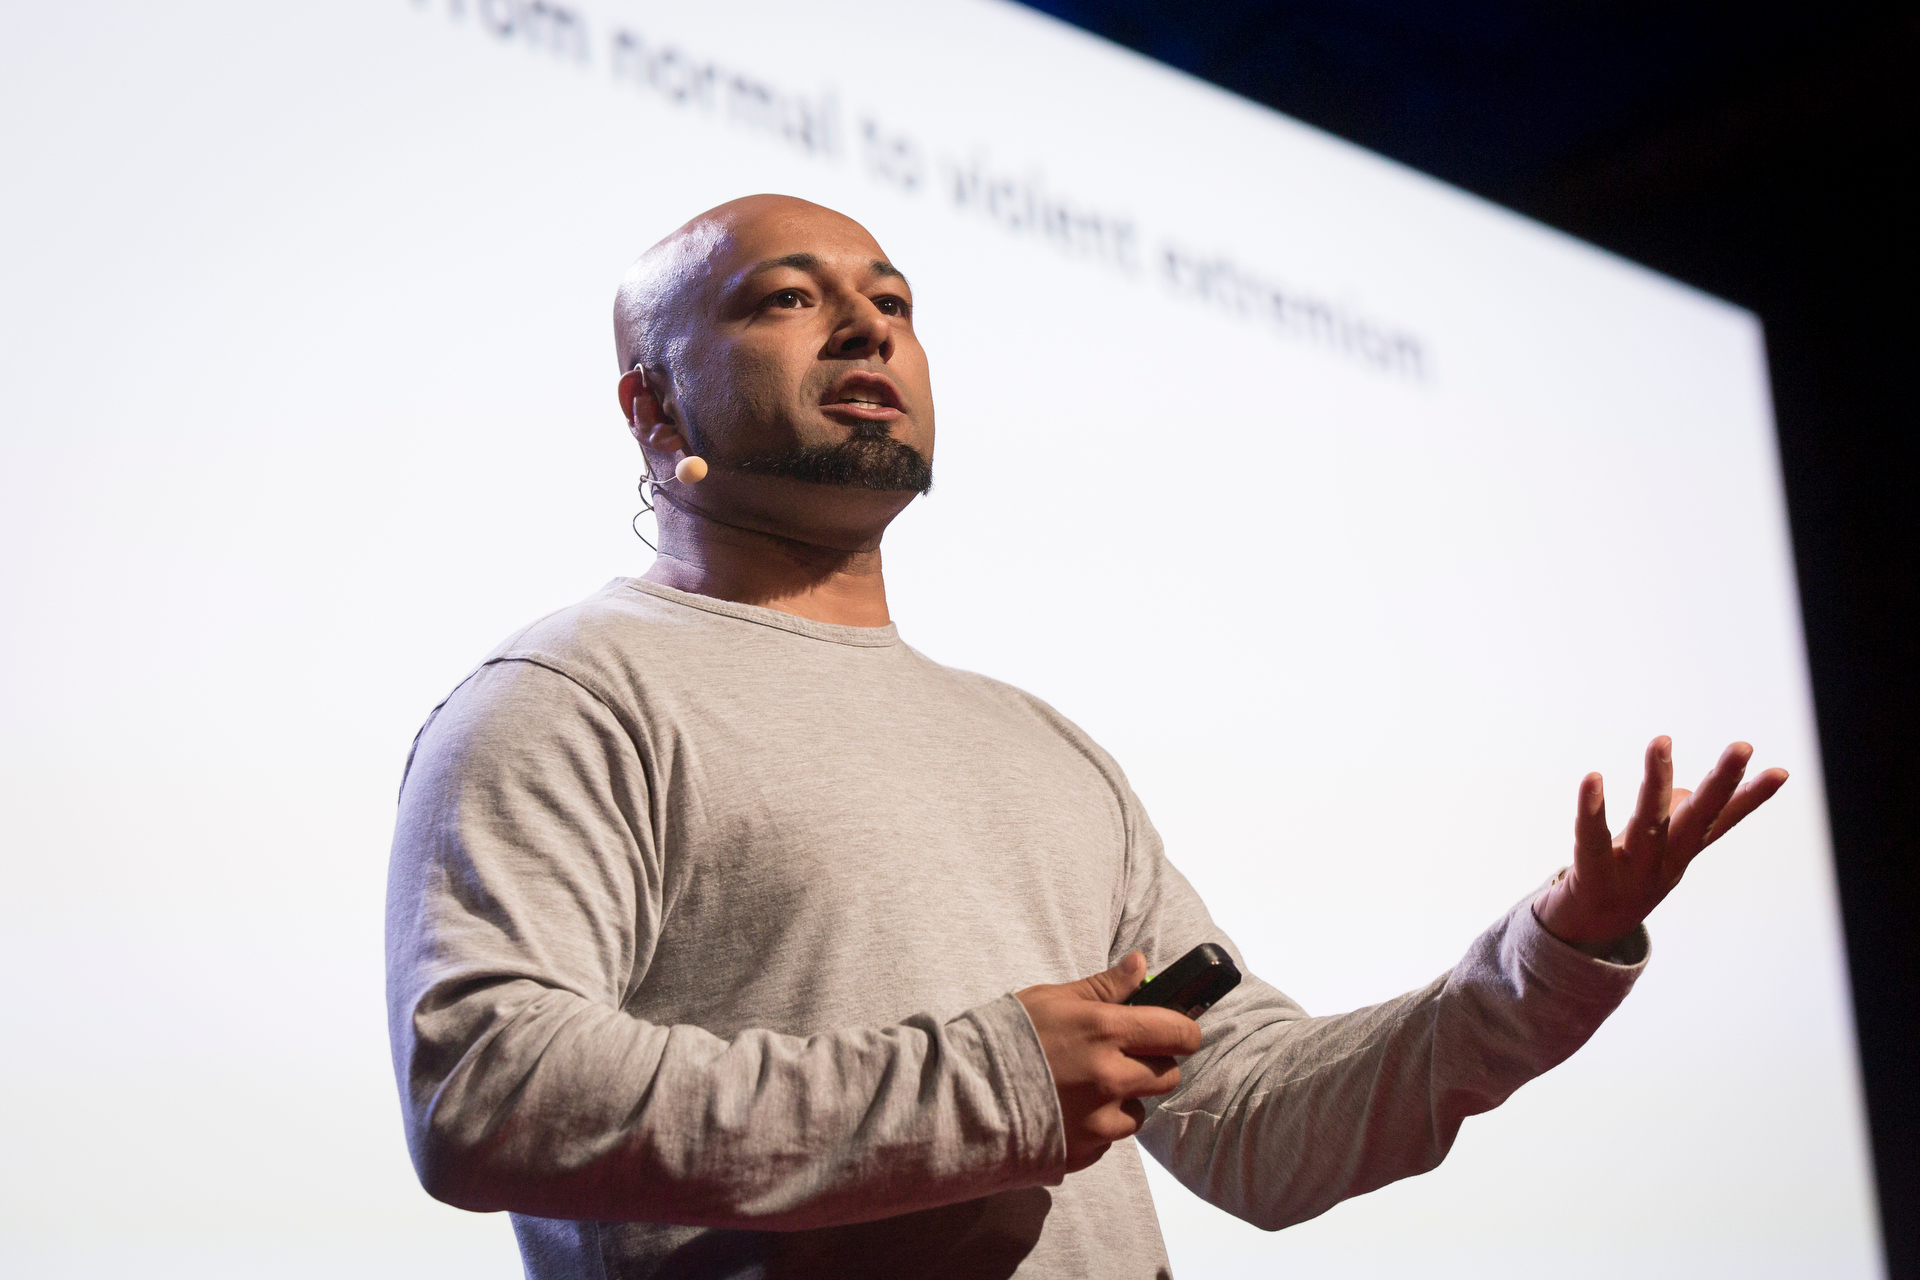 Mubin Shaikh speaks at TEDWomen2015 - Momentum, Session 3, May 28, 2015, Monterey Conference Center, Monterey, California, USA. Photo: Marla Aufmuth/TED